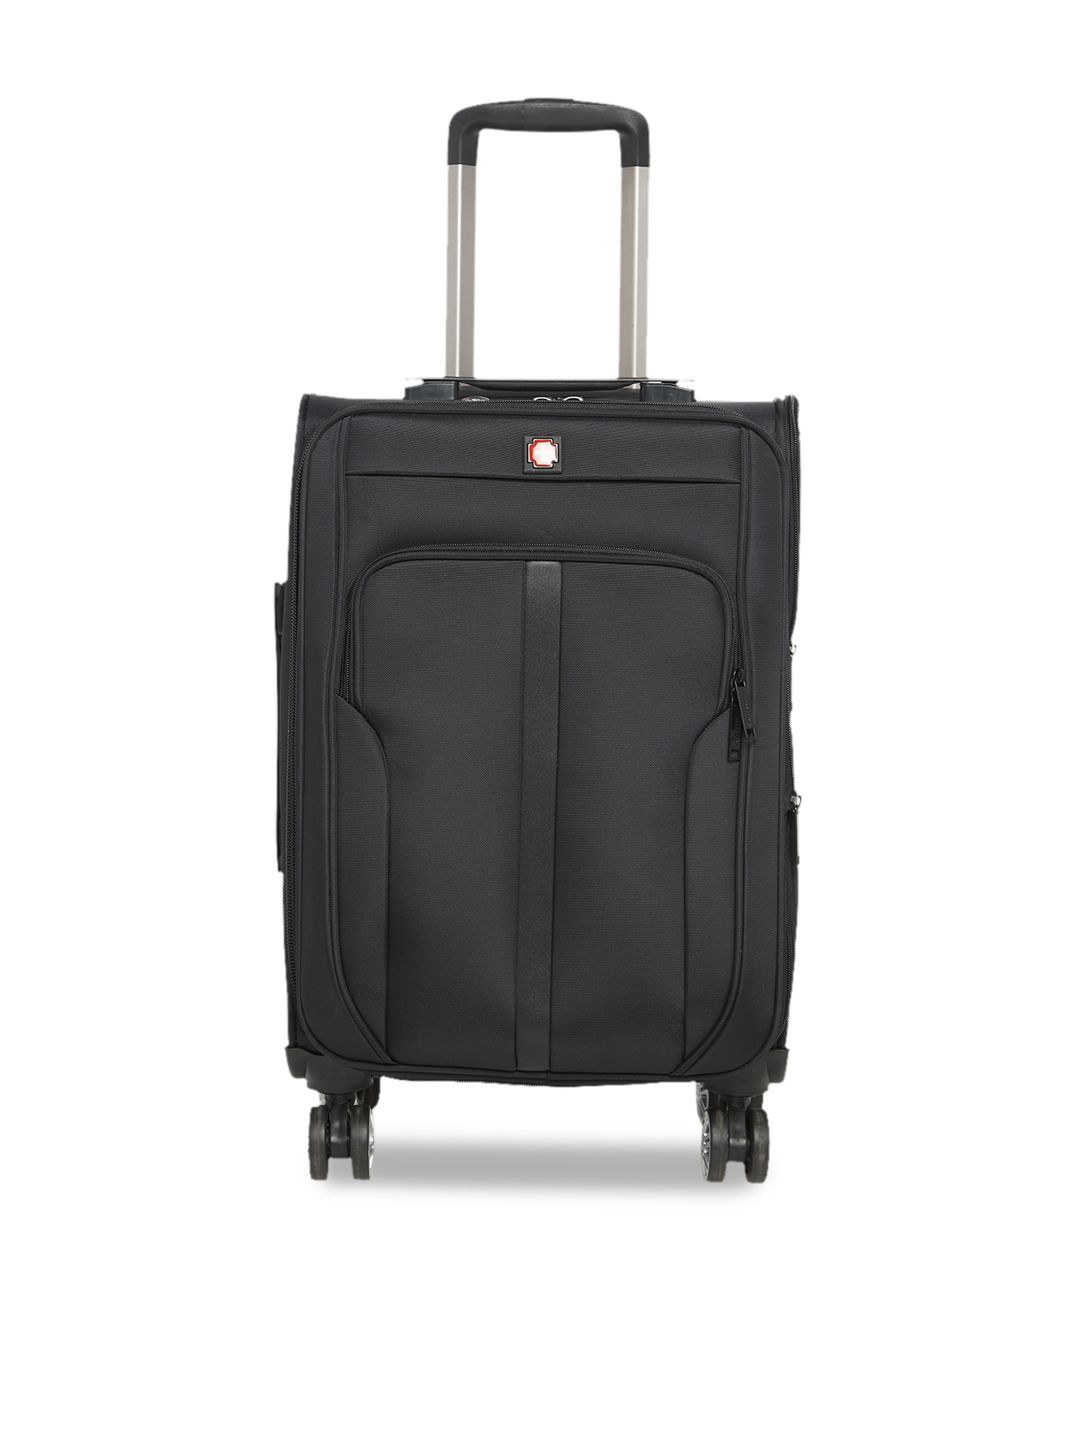 SWISS BRAND Black Solid Cabin Trolley Suitcase Price in India